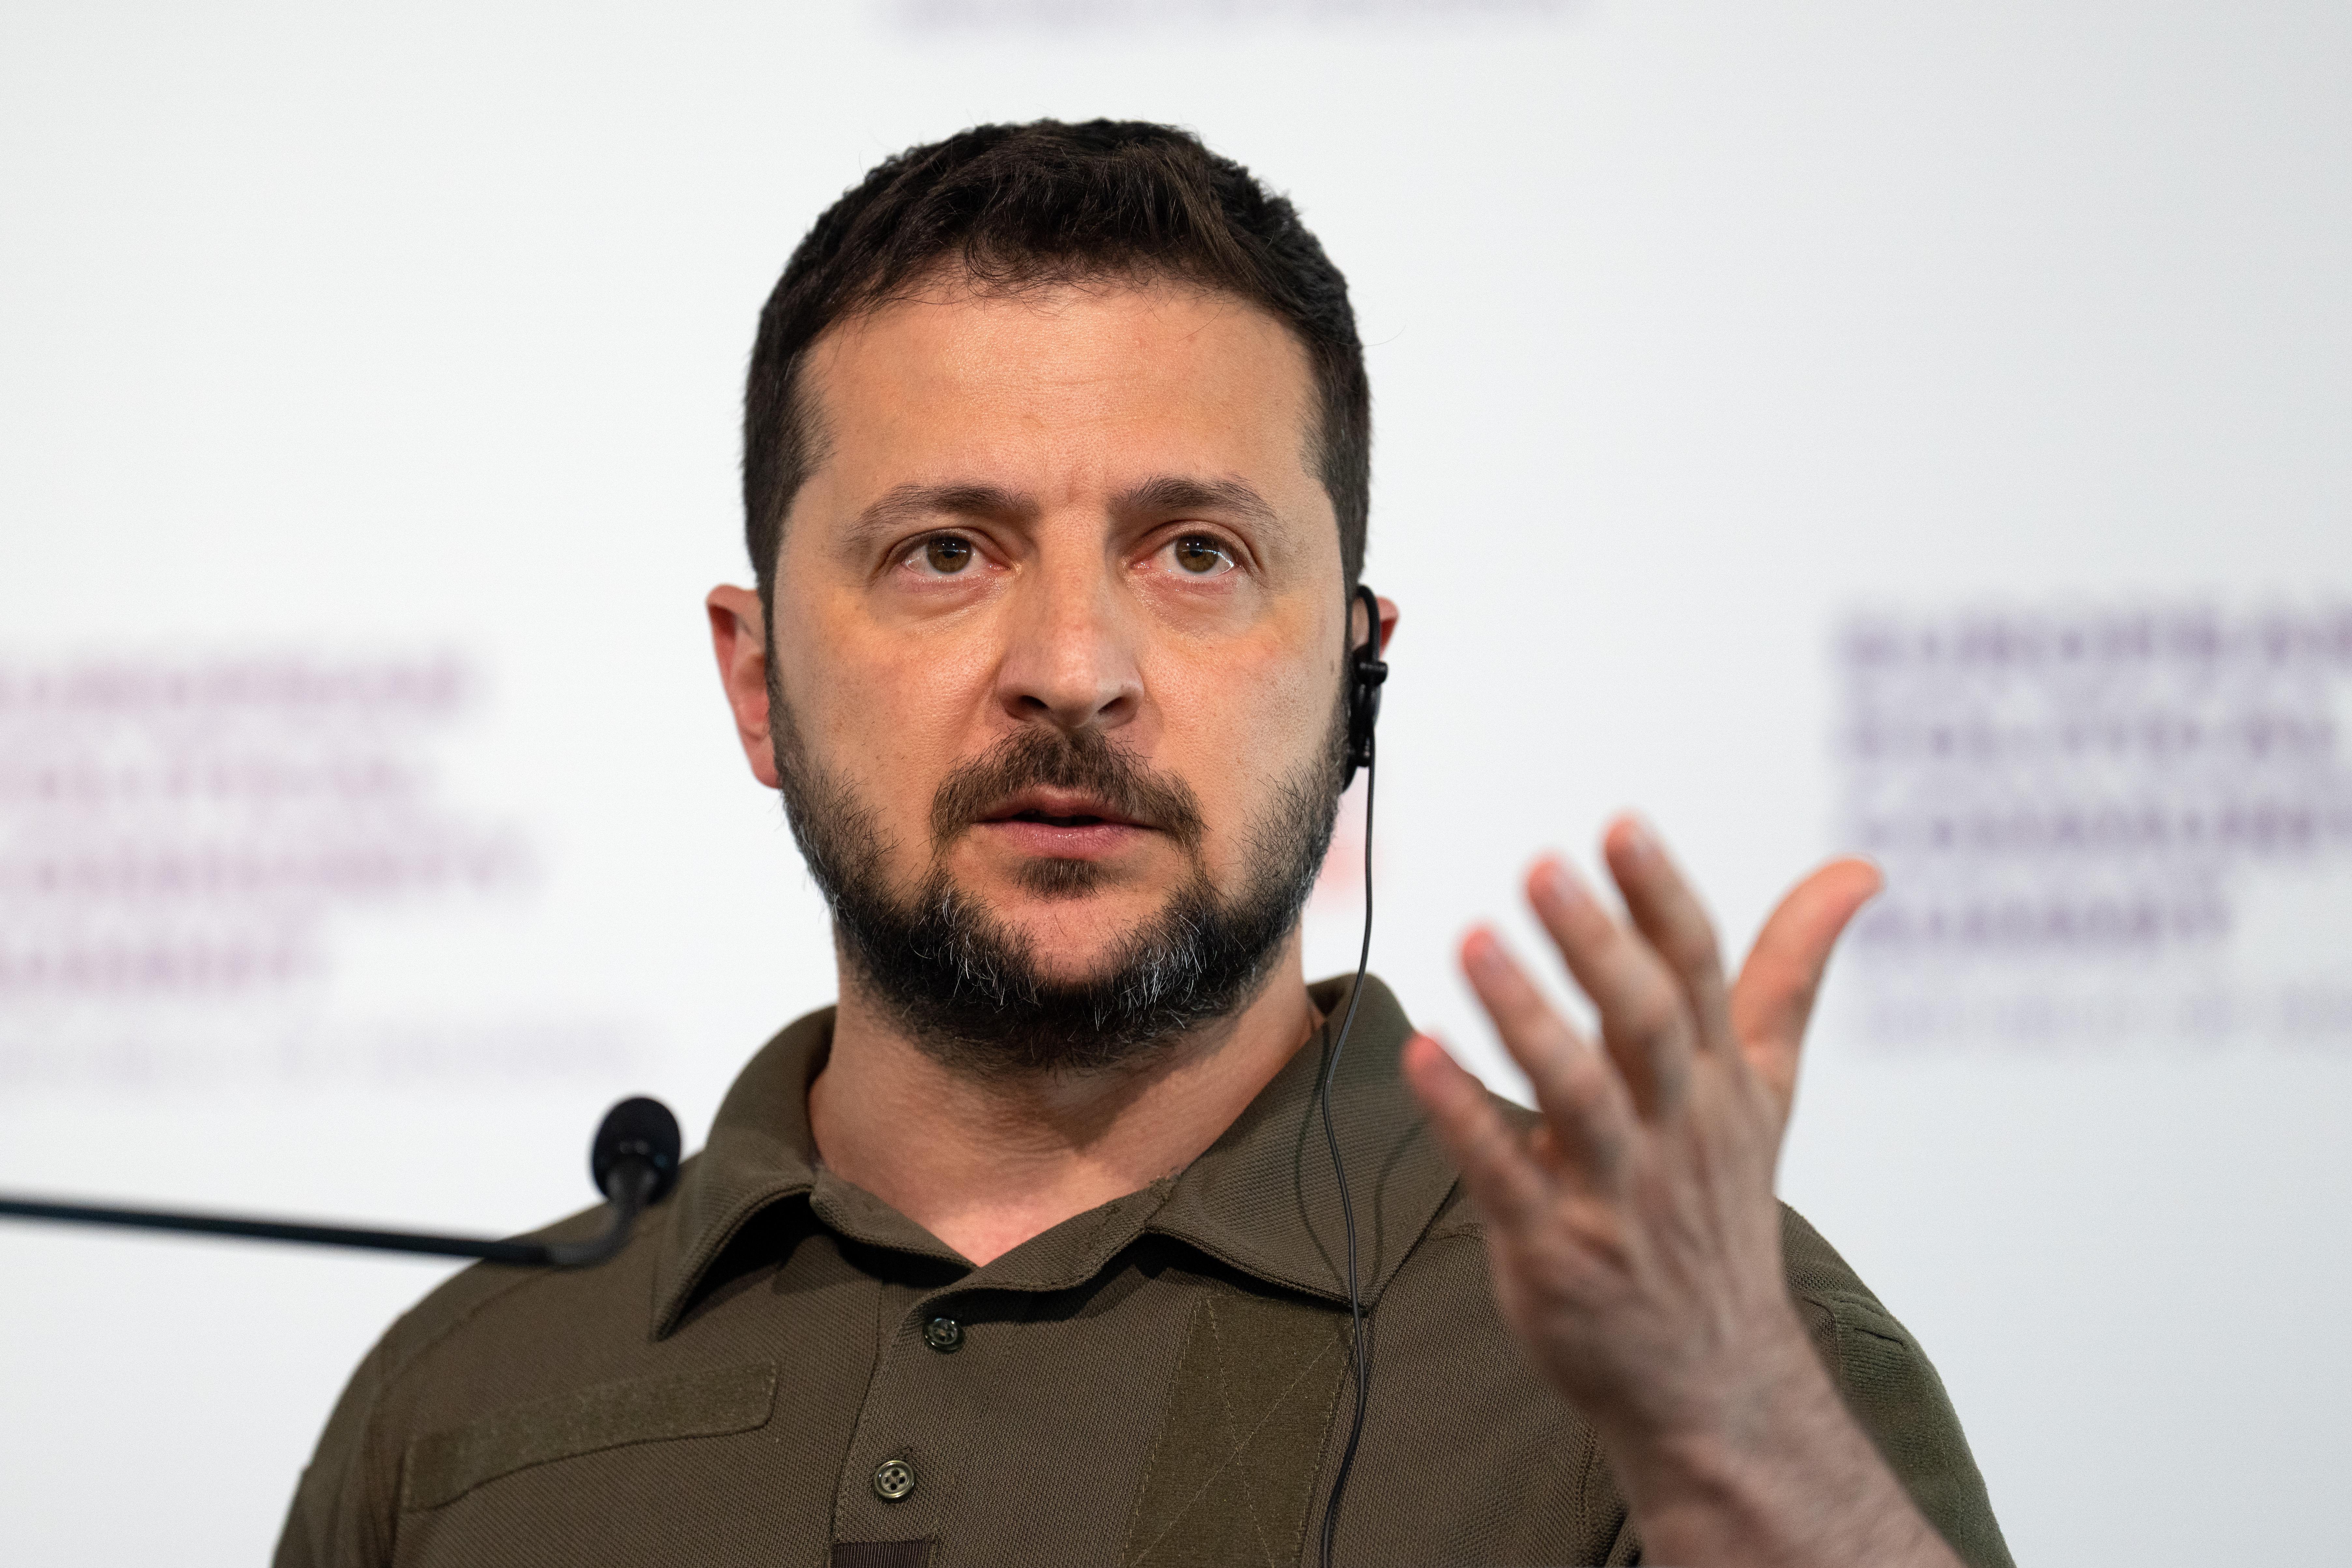 Volodymyr Zelensky, wearing a brown collared shirt, speaks before a microphone.